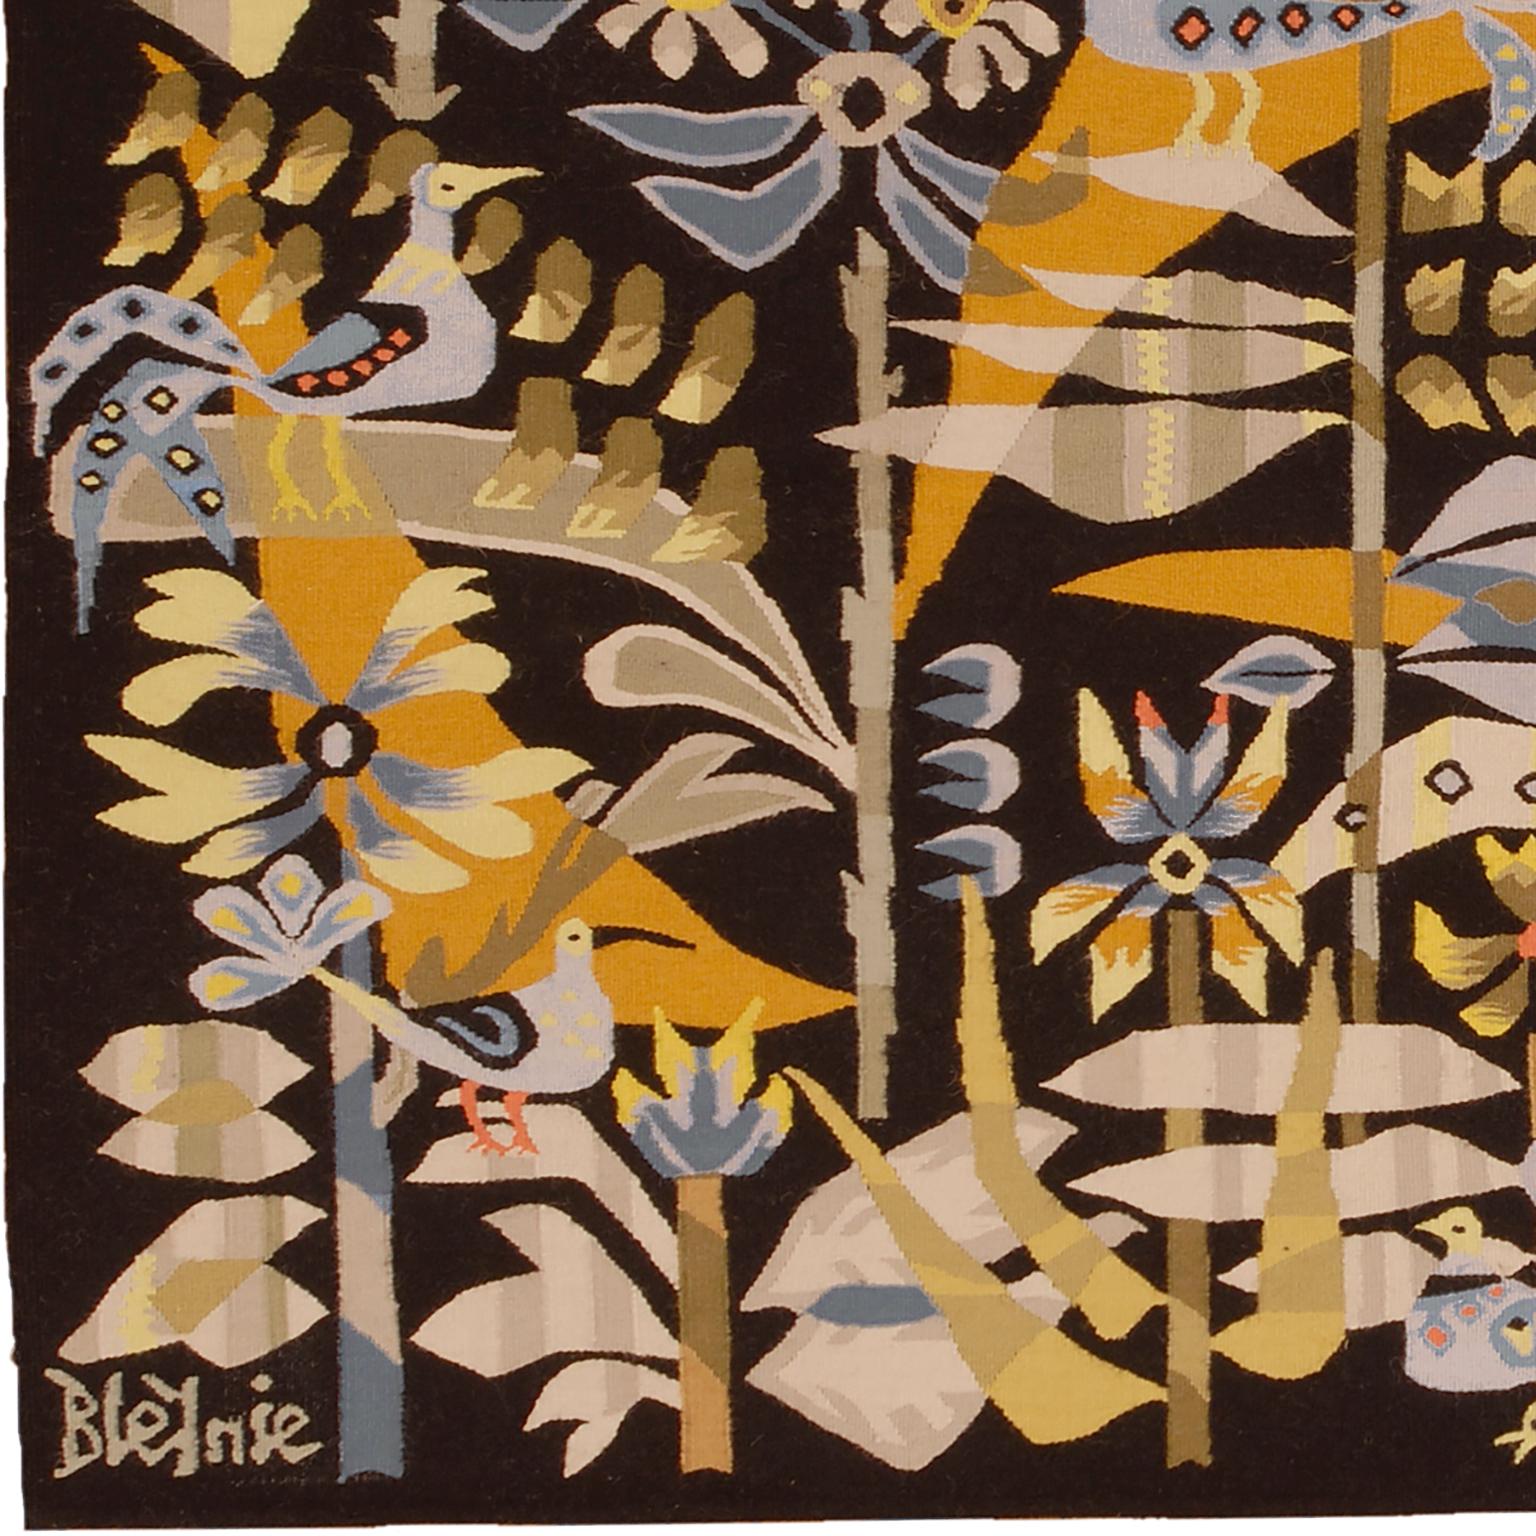 French Art Deco tapestry
France, circa 1970s
Handwoven
Signed: Bleynie.